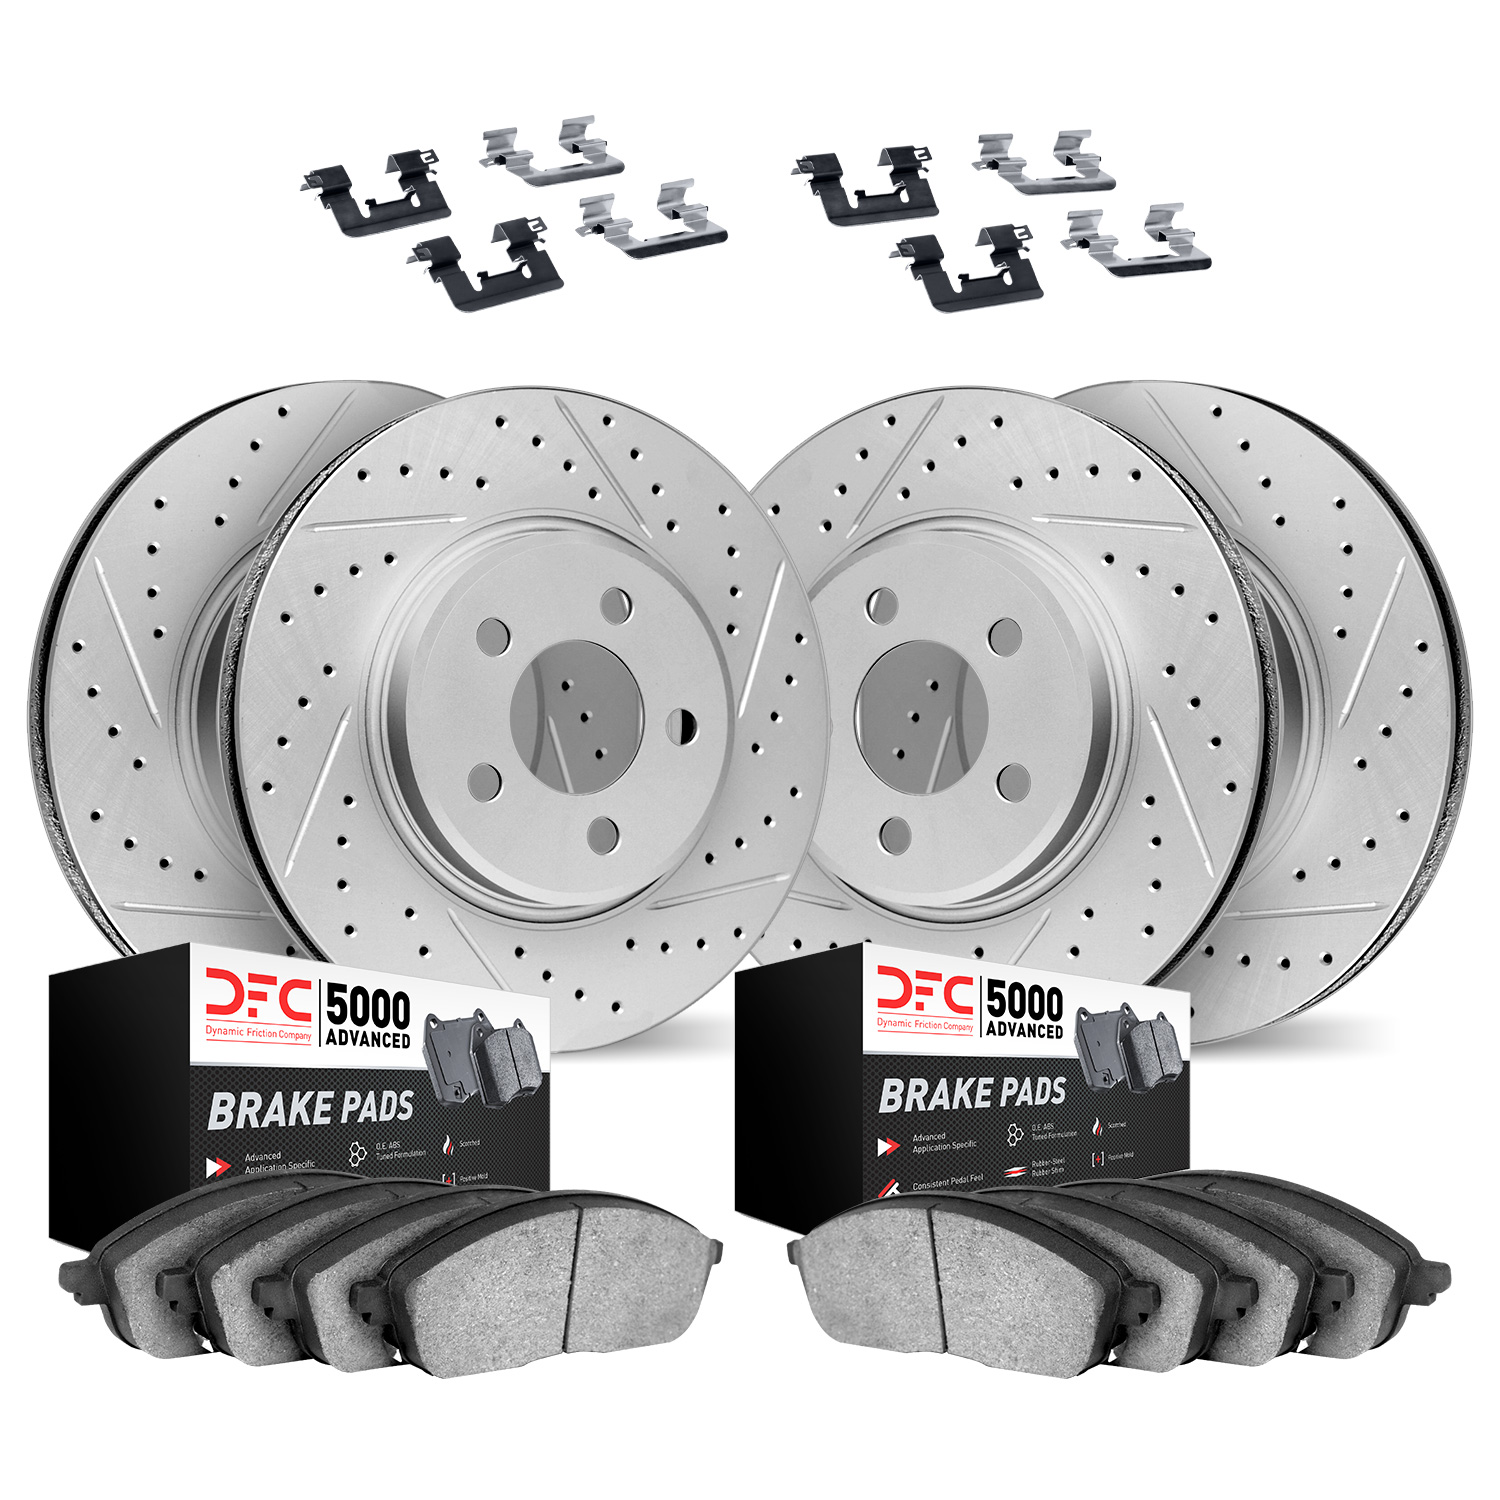 2514-31033 Geoperformance Drilled/Slotted Rotors w/5000 Advanced Brake Pads Kit & Hardware, 2013-2018 BMW, Position: Front and R